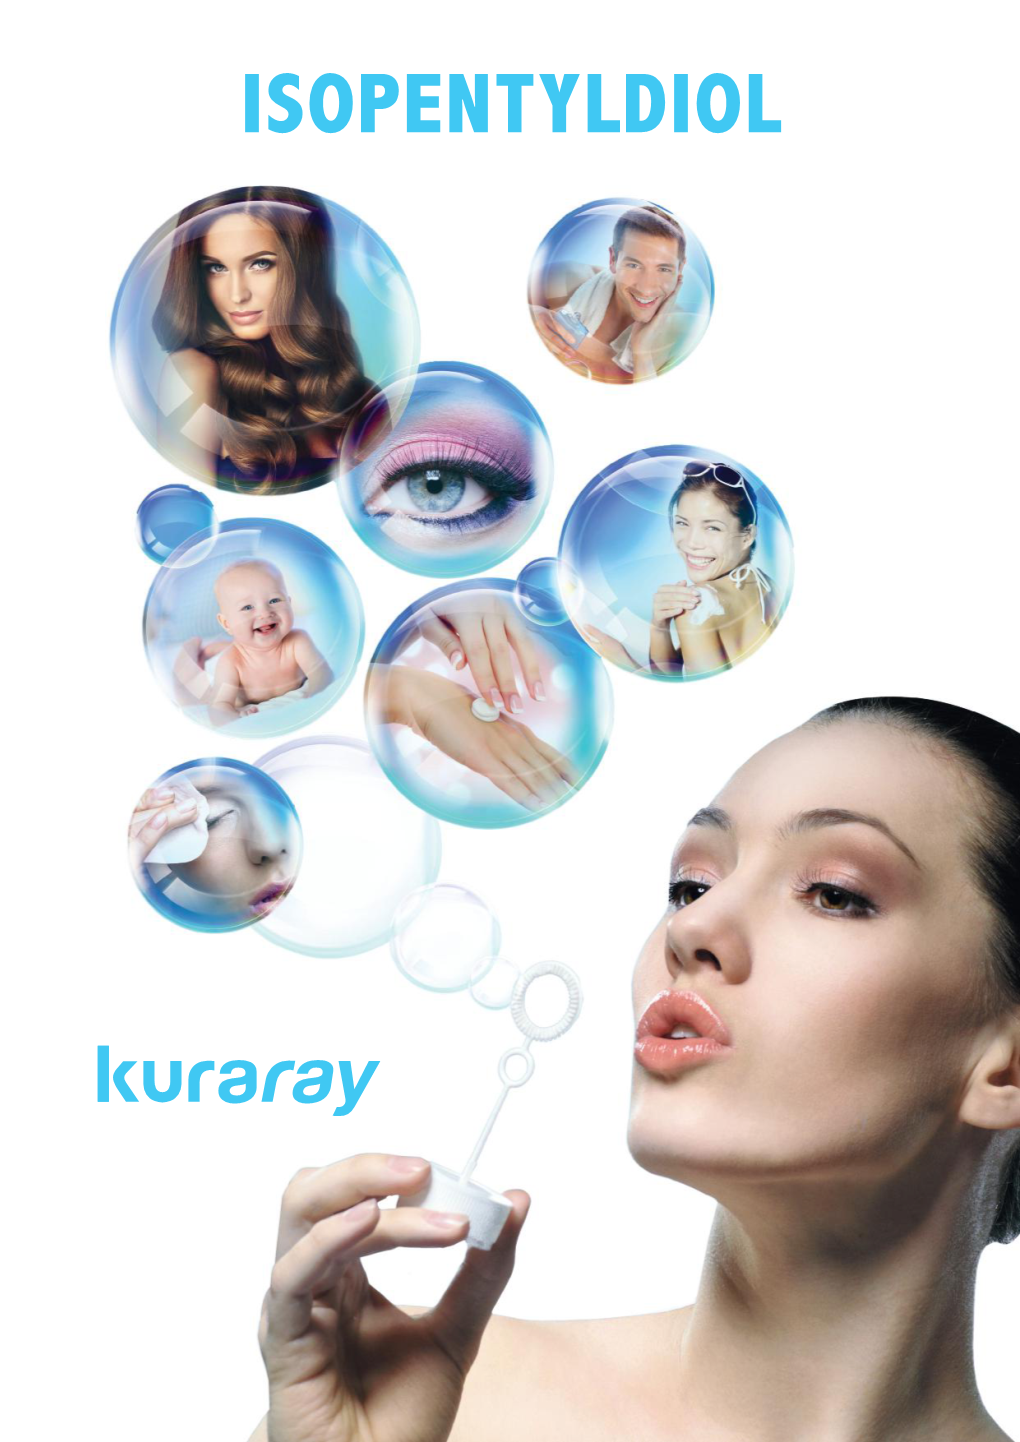 ISOPENTYLDIOL Isopentyldiol a Multi-Purpose Ingredient for Innovative Cosmetic Formulations Isopentyldiol Is a Multi-Purpose Cosmetic Ingredient Produced by Kuraray